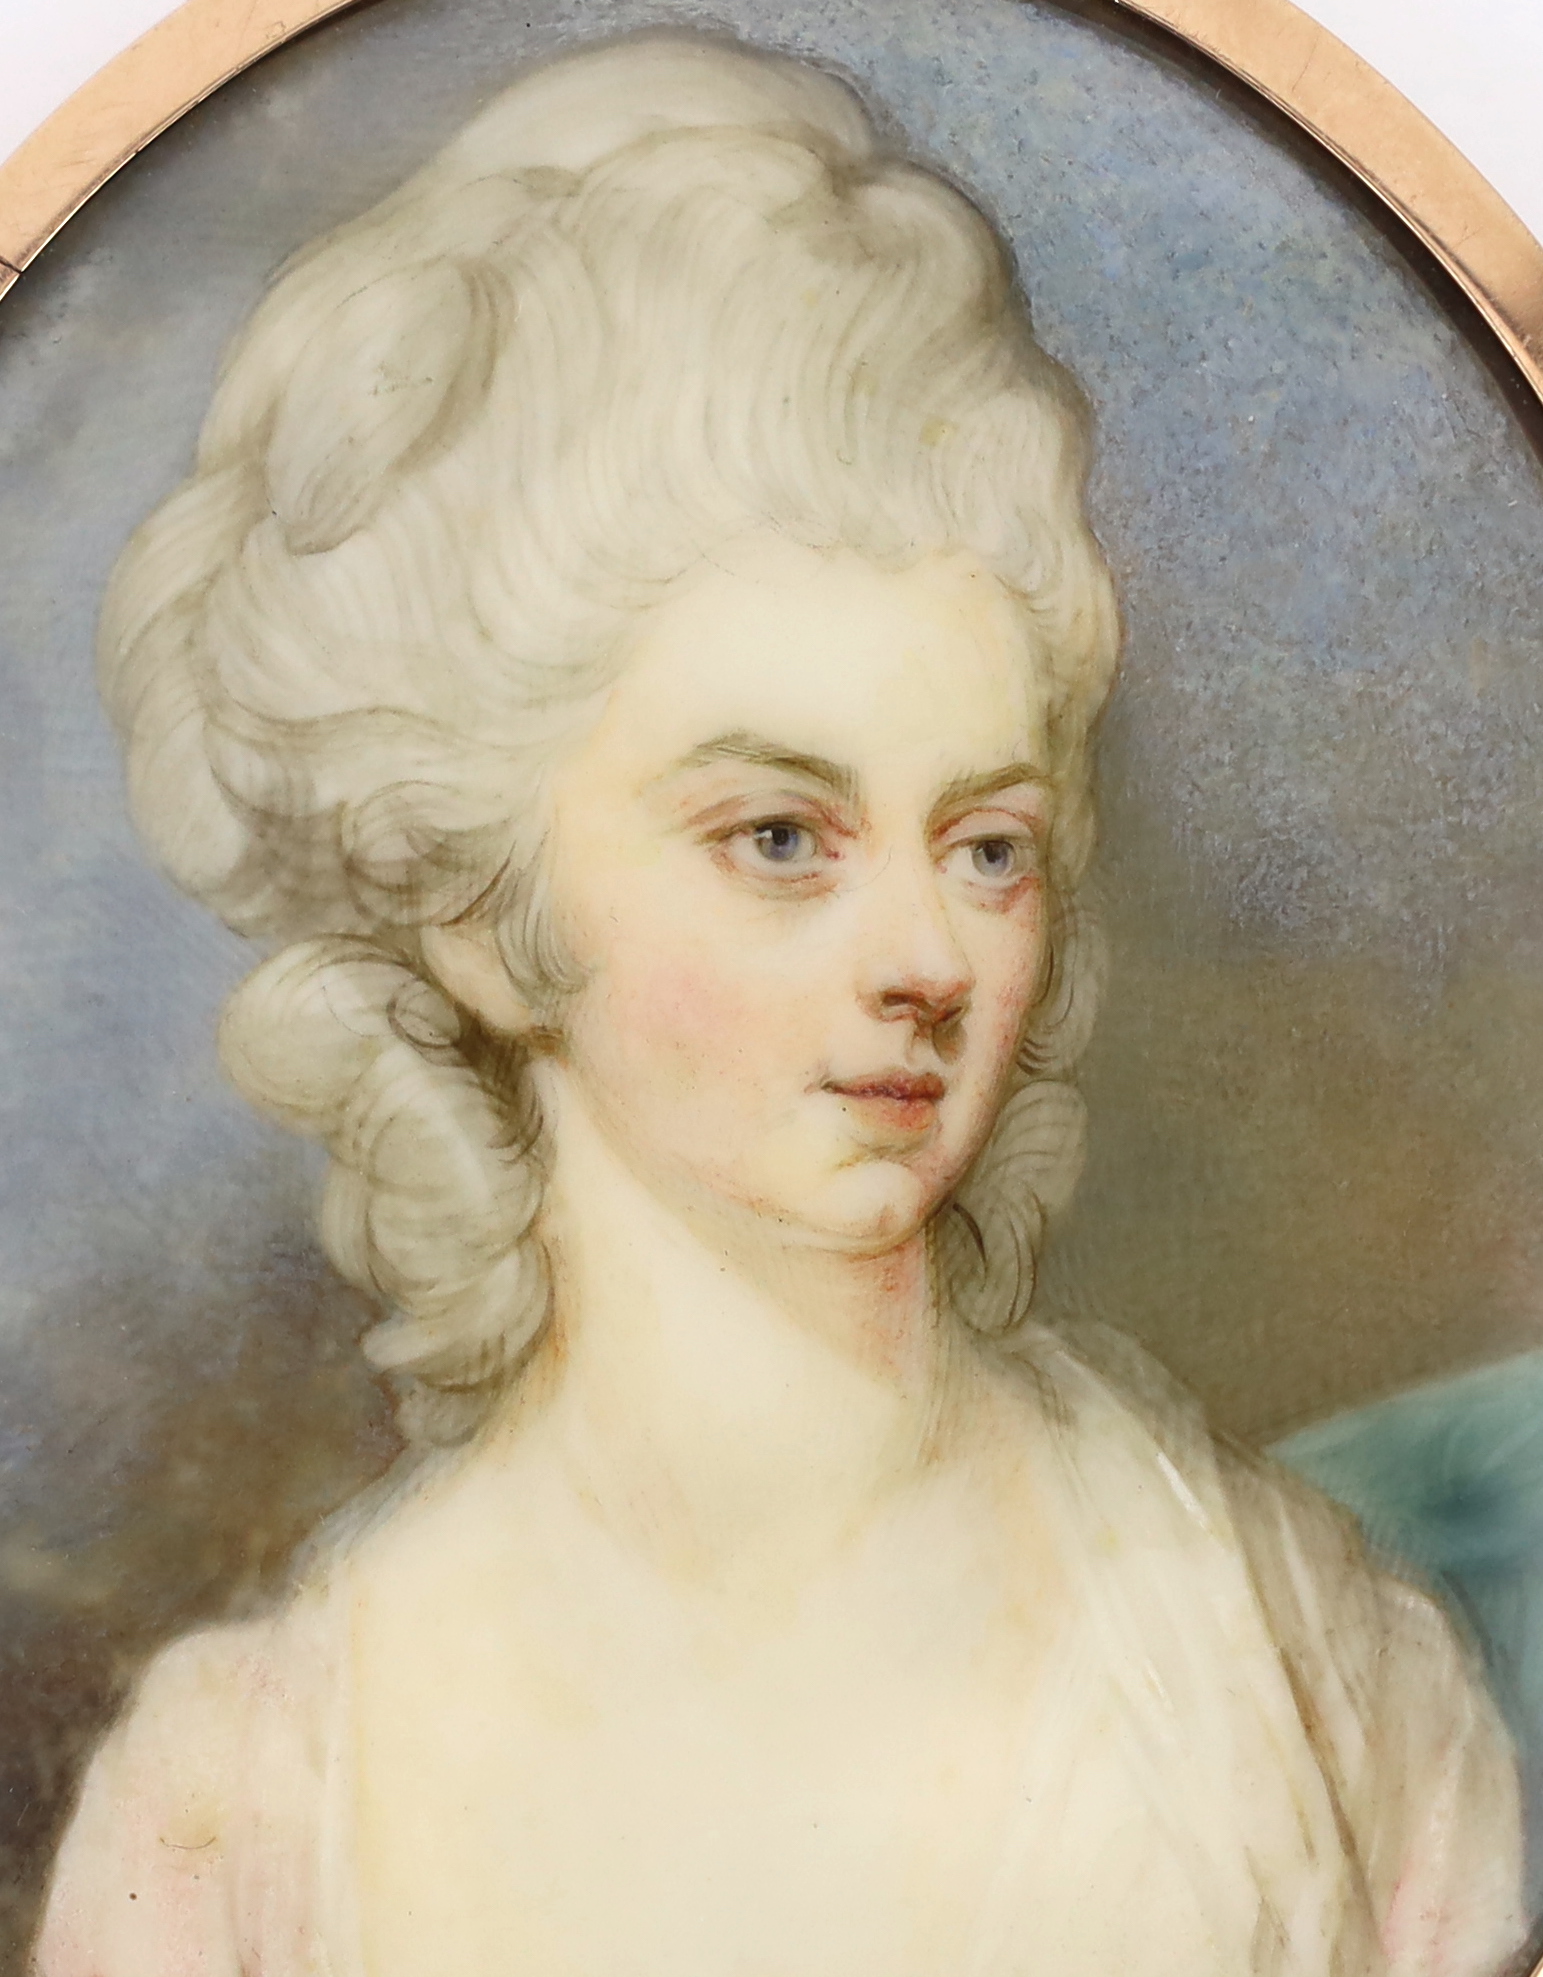 English School circa 1810, Portrait miniature of a lady, watercolour on ivory, 7.5 x 6cm. CITES Submission reference X6R2PB3K